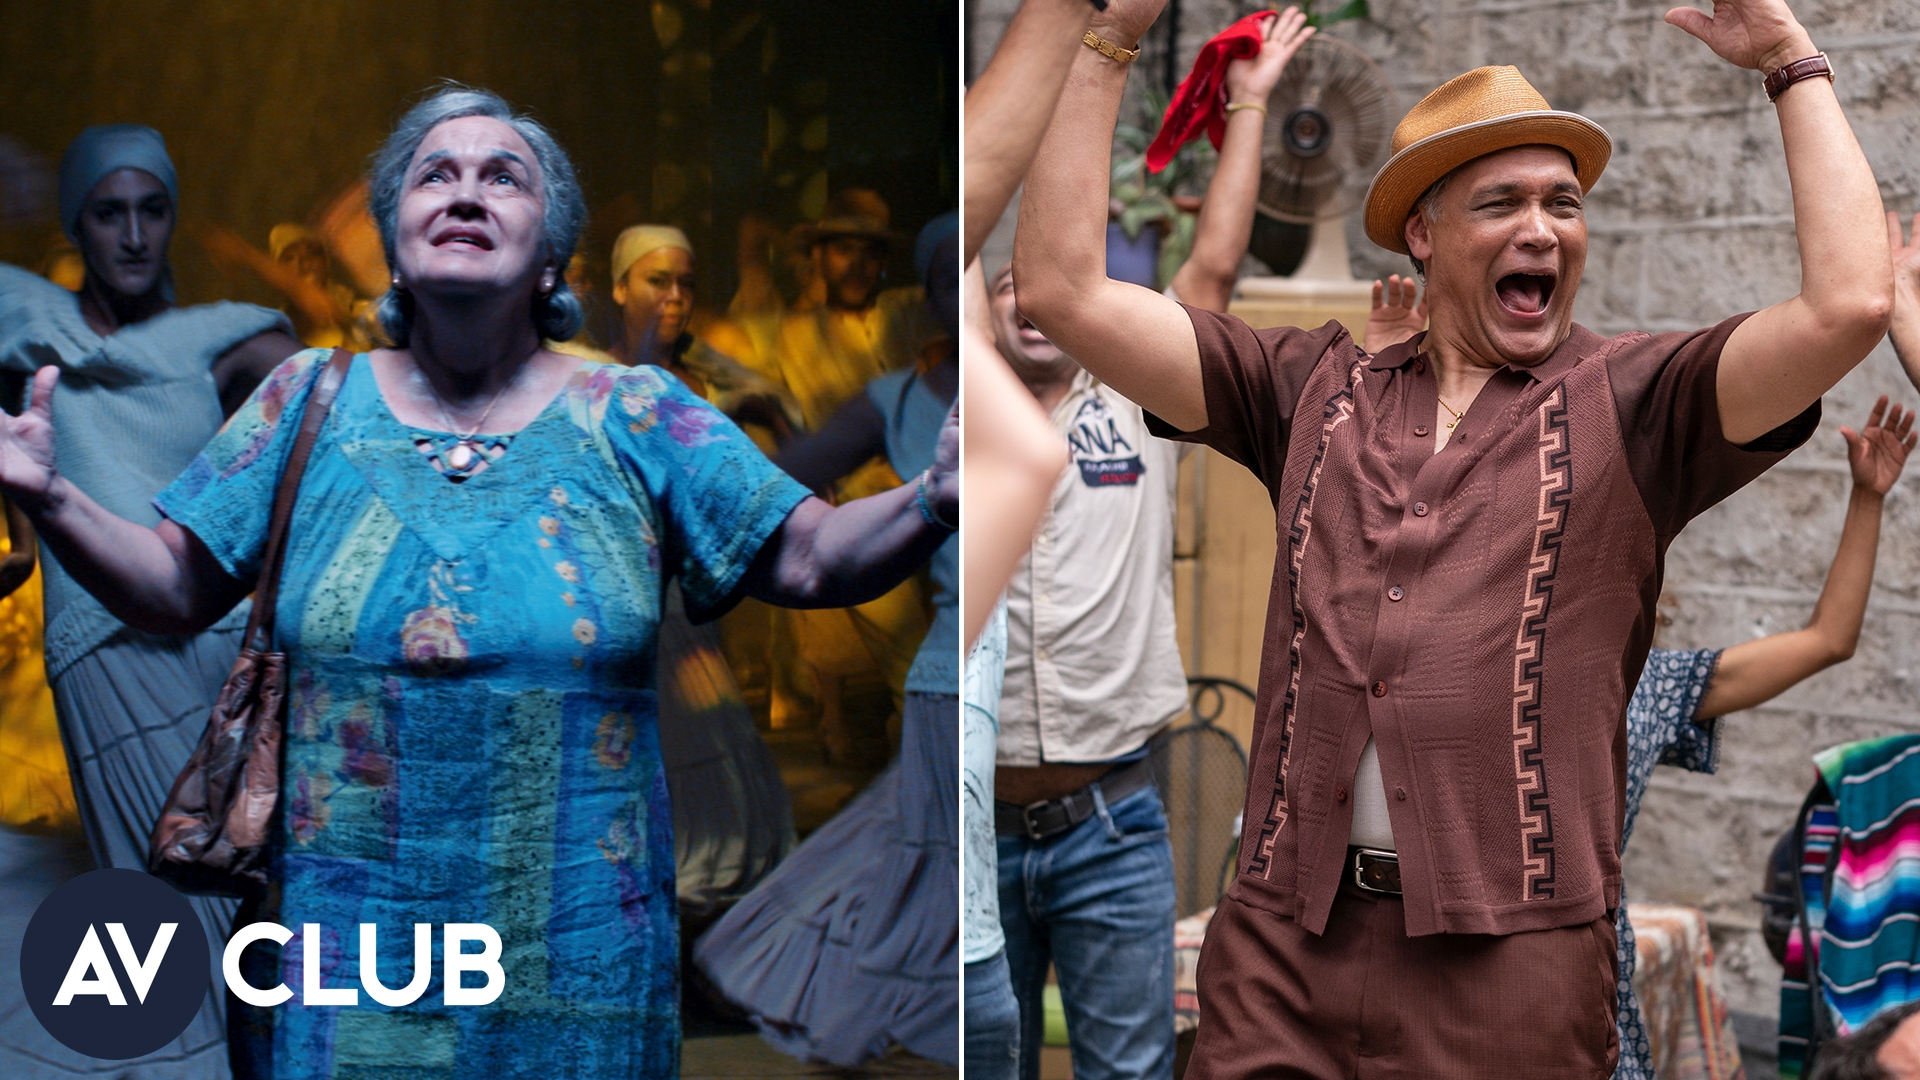 In The Heights' Olga Merediz has spent a decade with Abuela Claudia